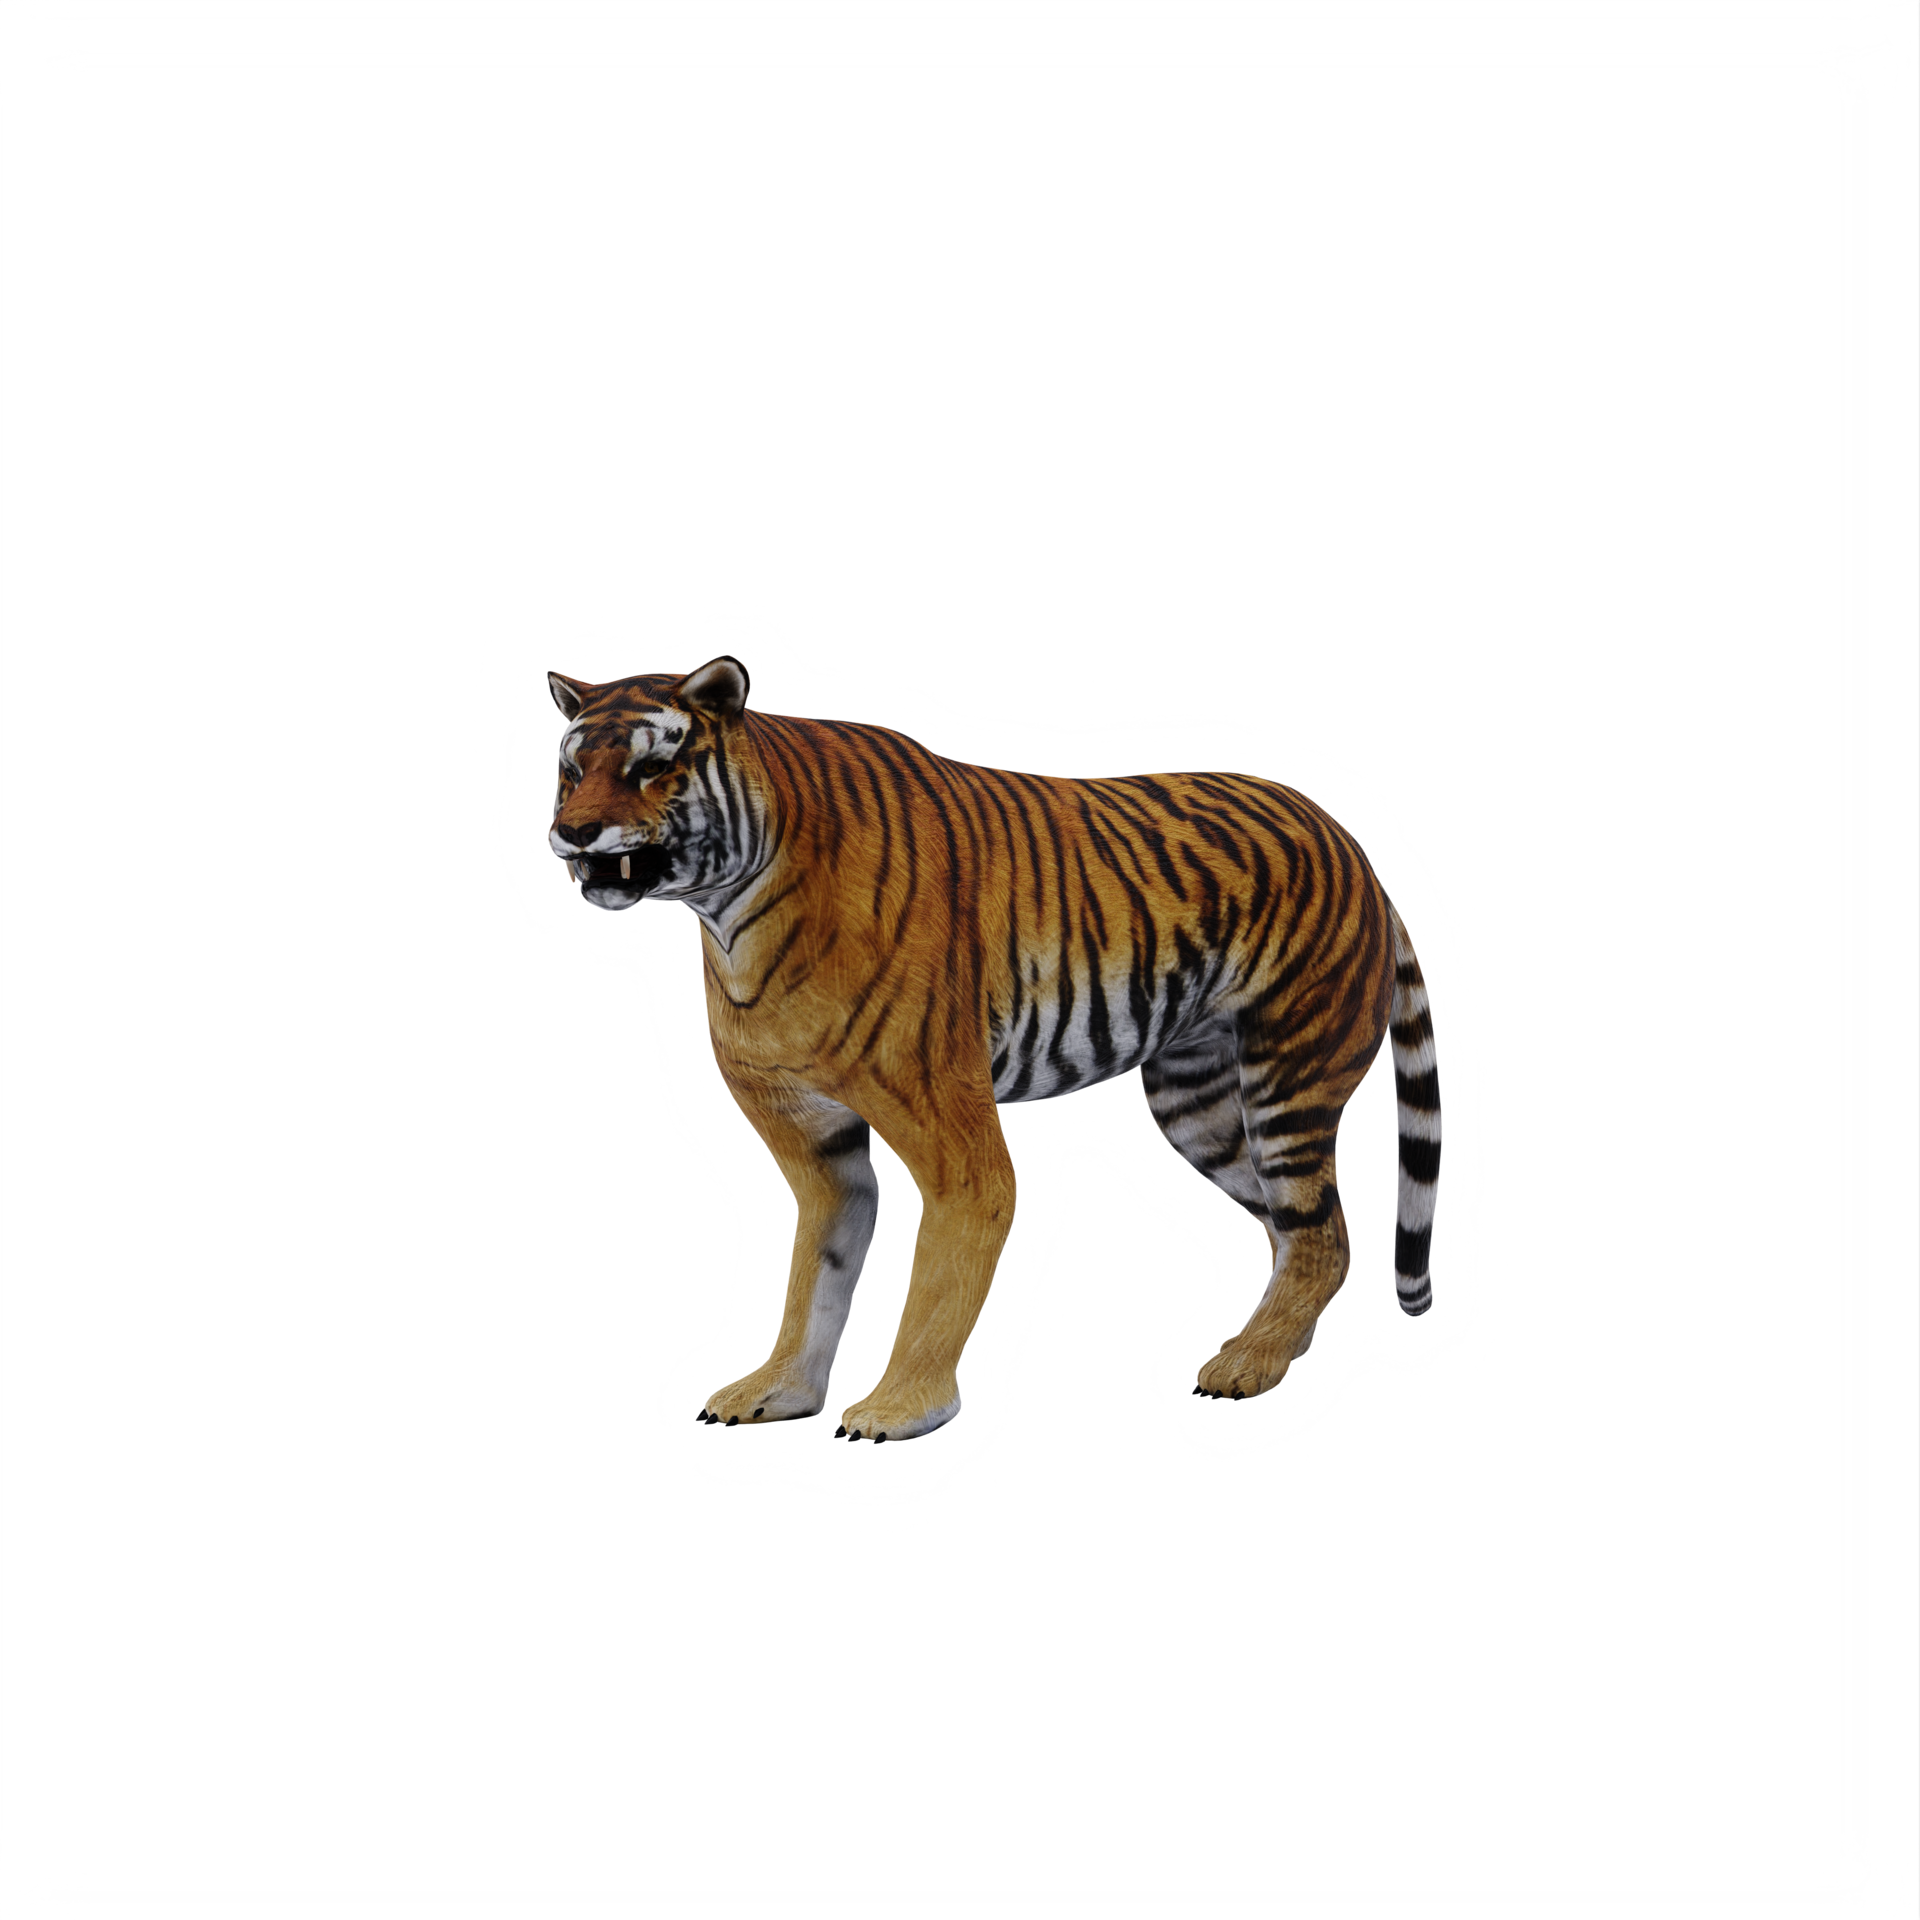 212,647 Tiger Isolated Images, Stock Photos, 3D objects, & Vectors